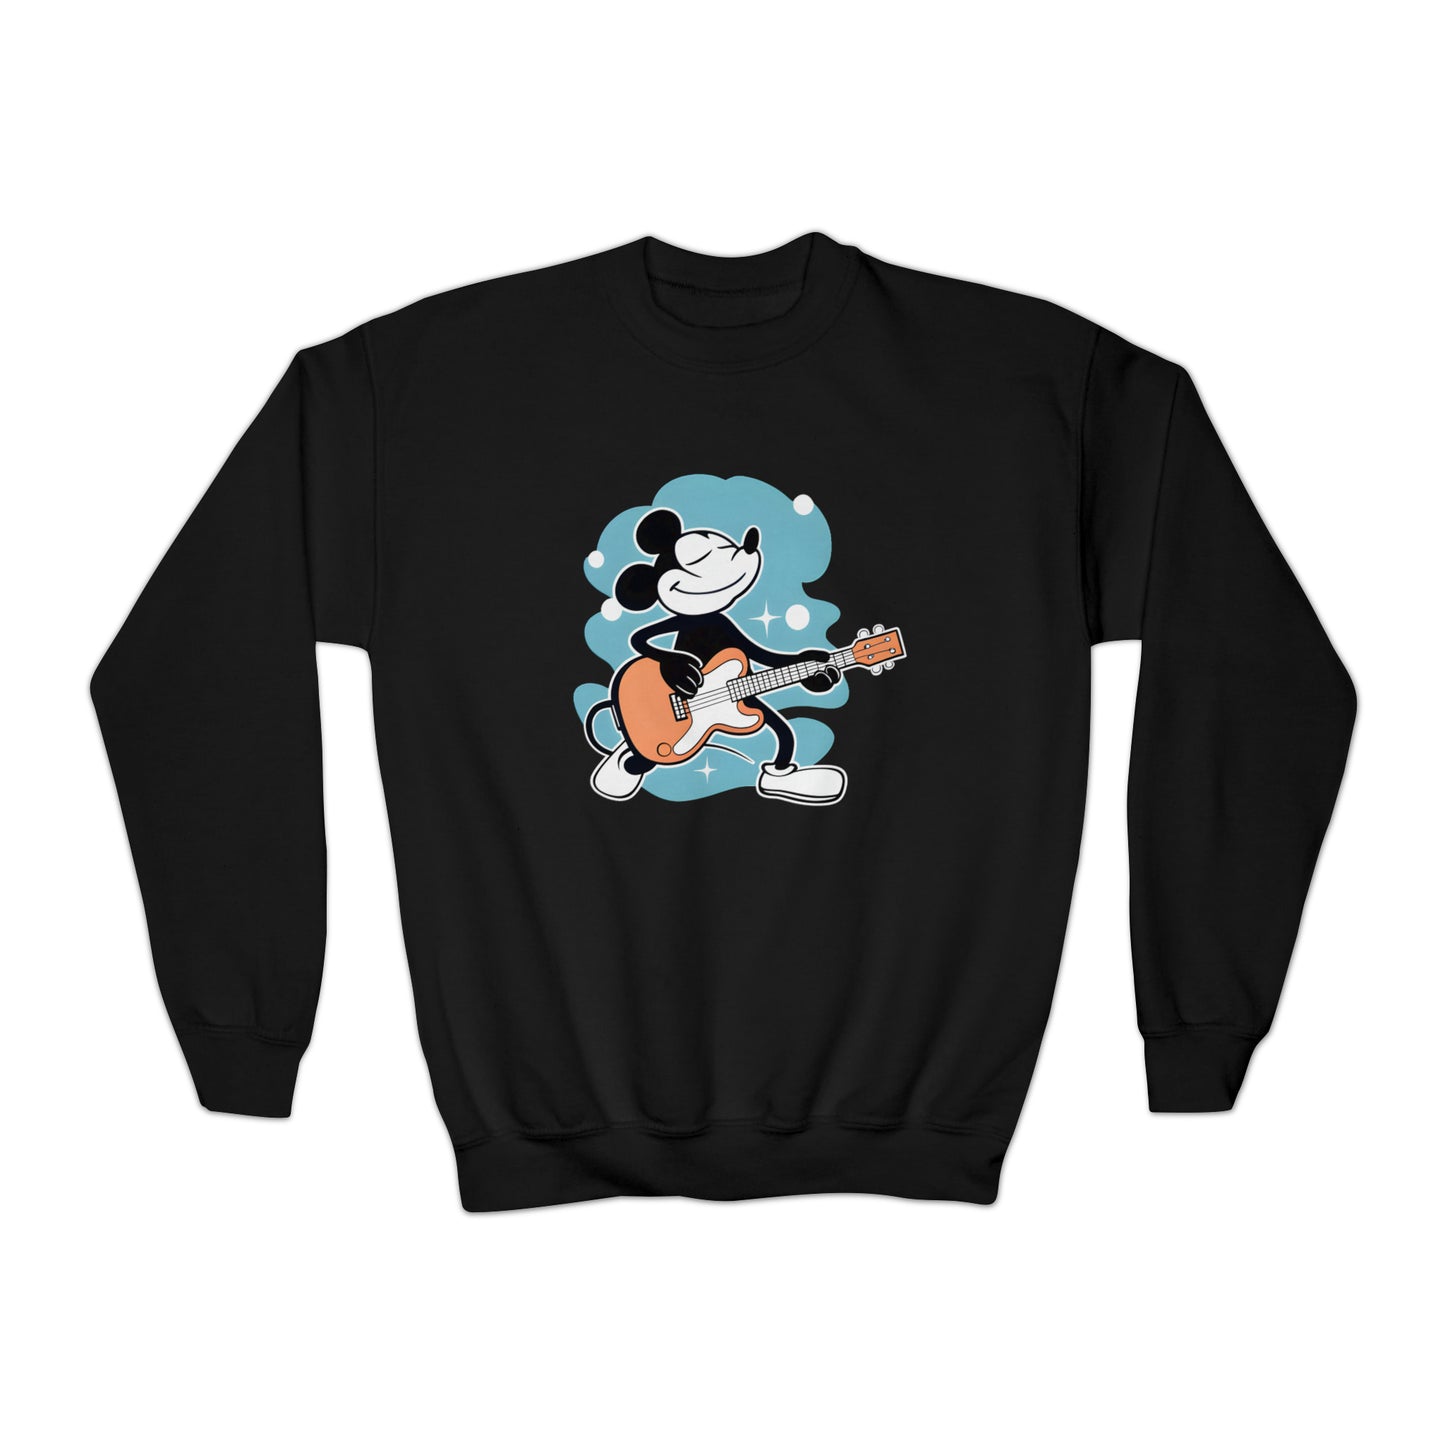 Happy Mouse Rocks Youth Crewneck Sweatshirt, Mickey Plays Guitar, Kid's clothing, Warm and Cozy